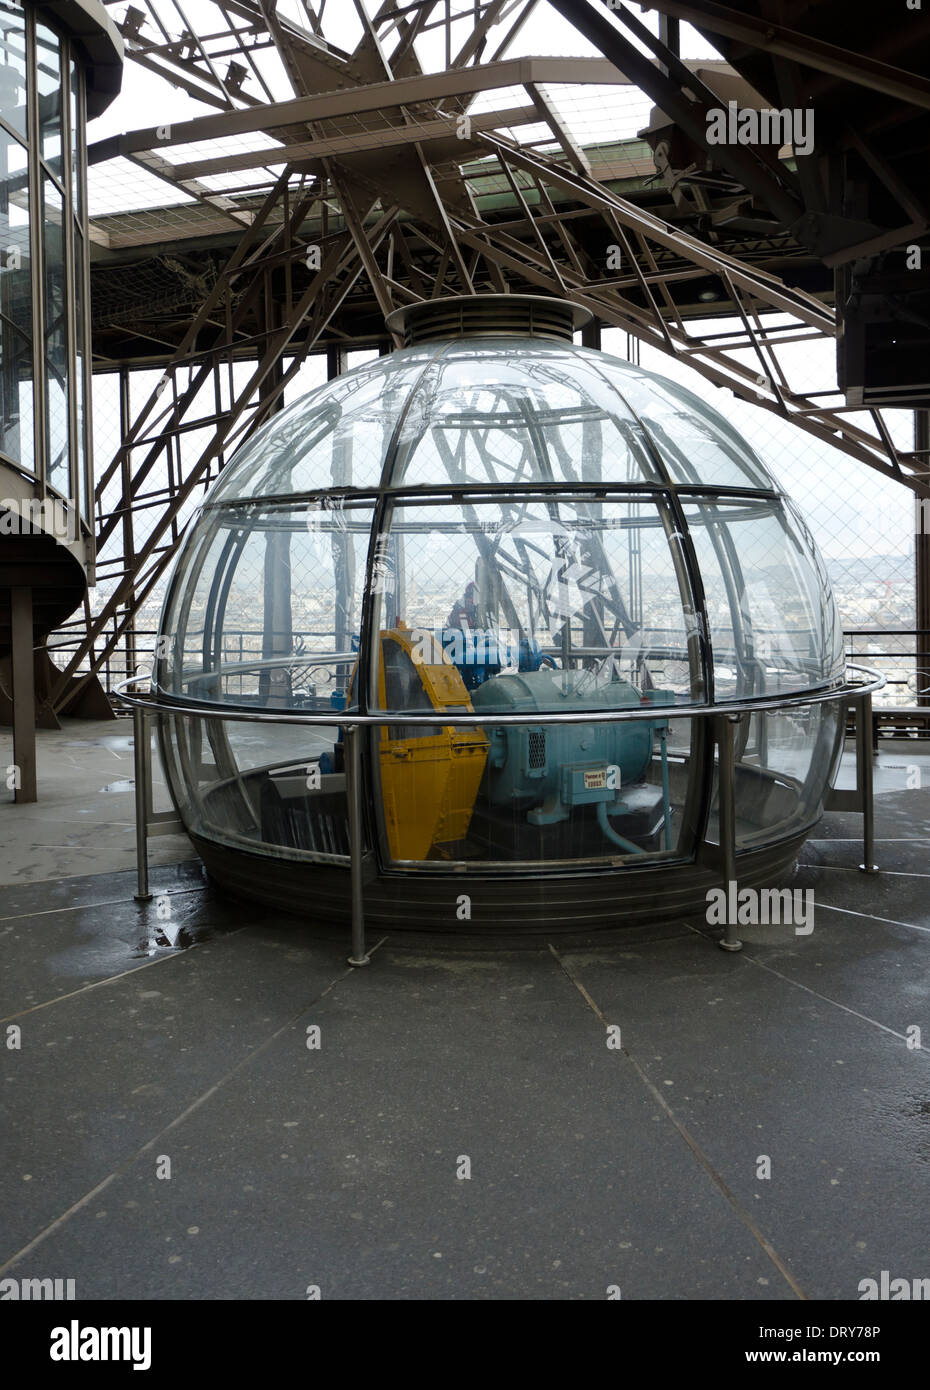 The original Hydraulic pump for the Edoux lifts on display on the Eiffel tower, Paris, France. Stock Photo